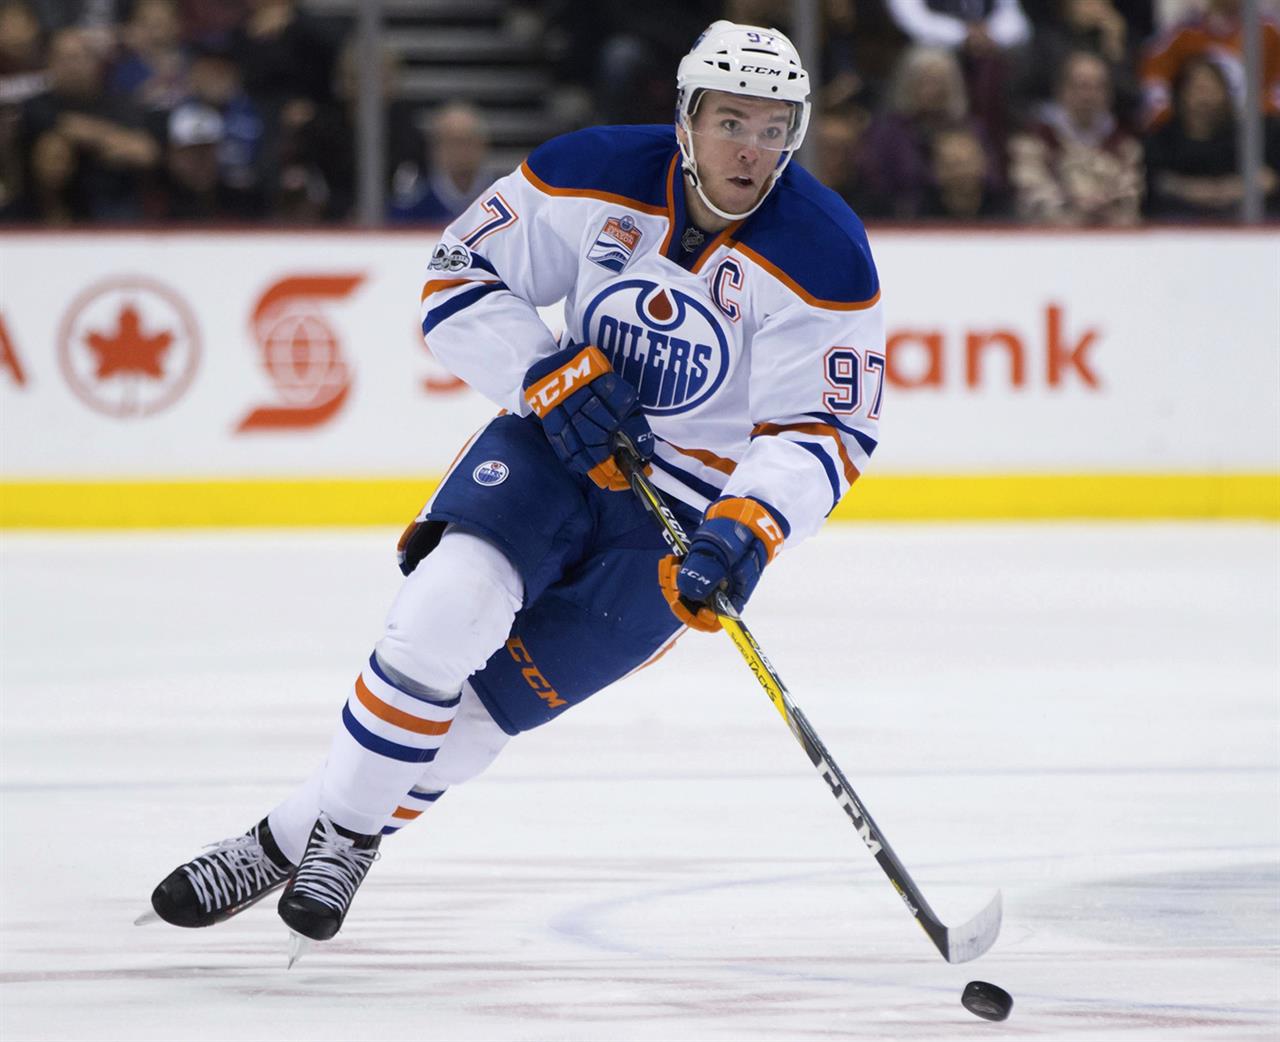 Oilers sign star Connor McDavid to 8year, 100 million deal Houston, TX